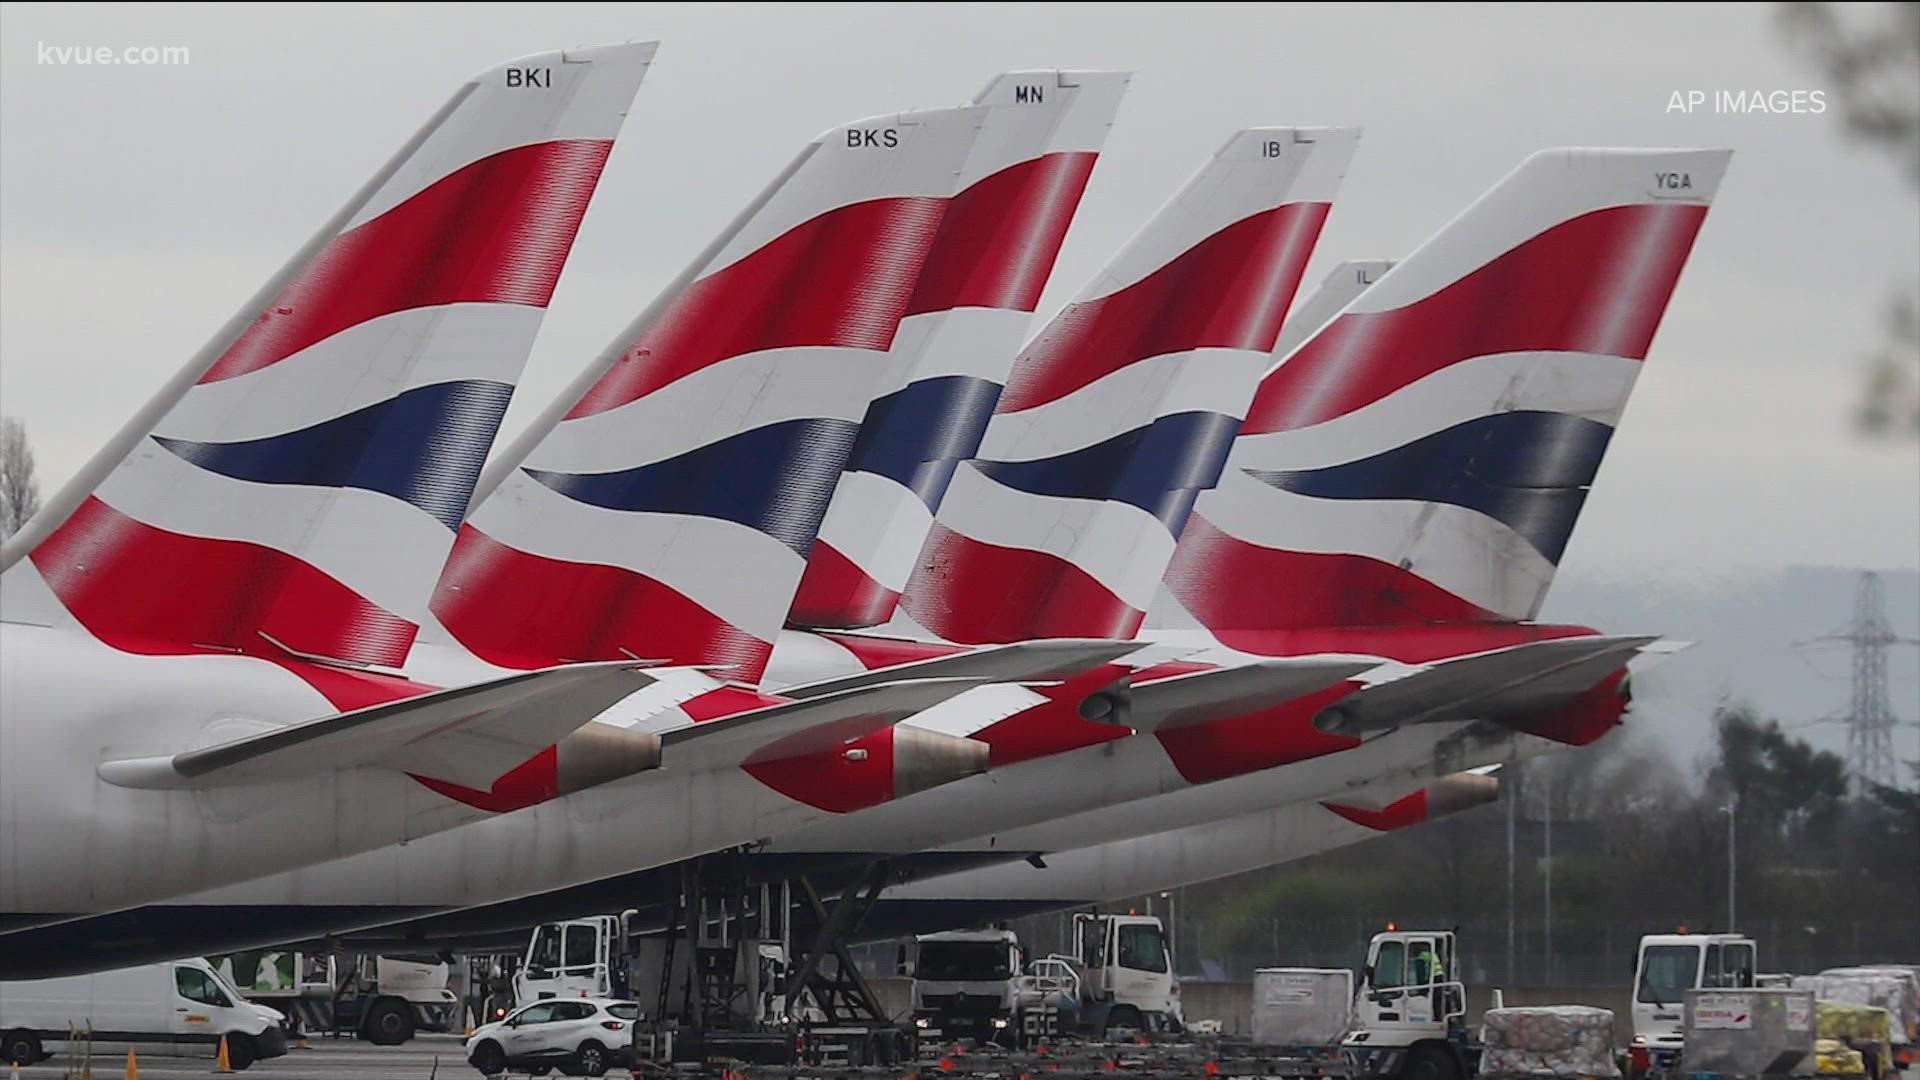 Leaders with British Airways say they will resume their direct flights from Austin to London in October.